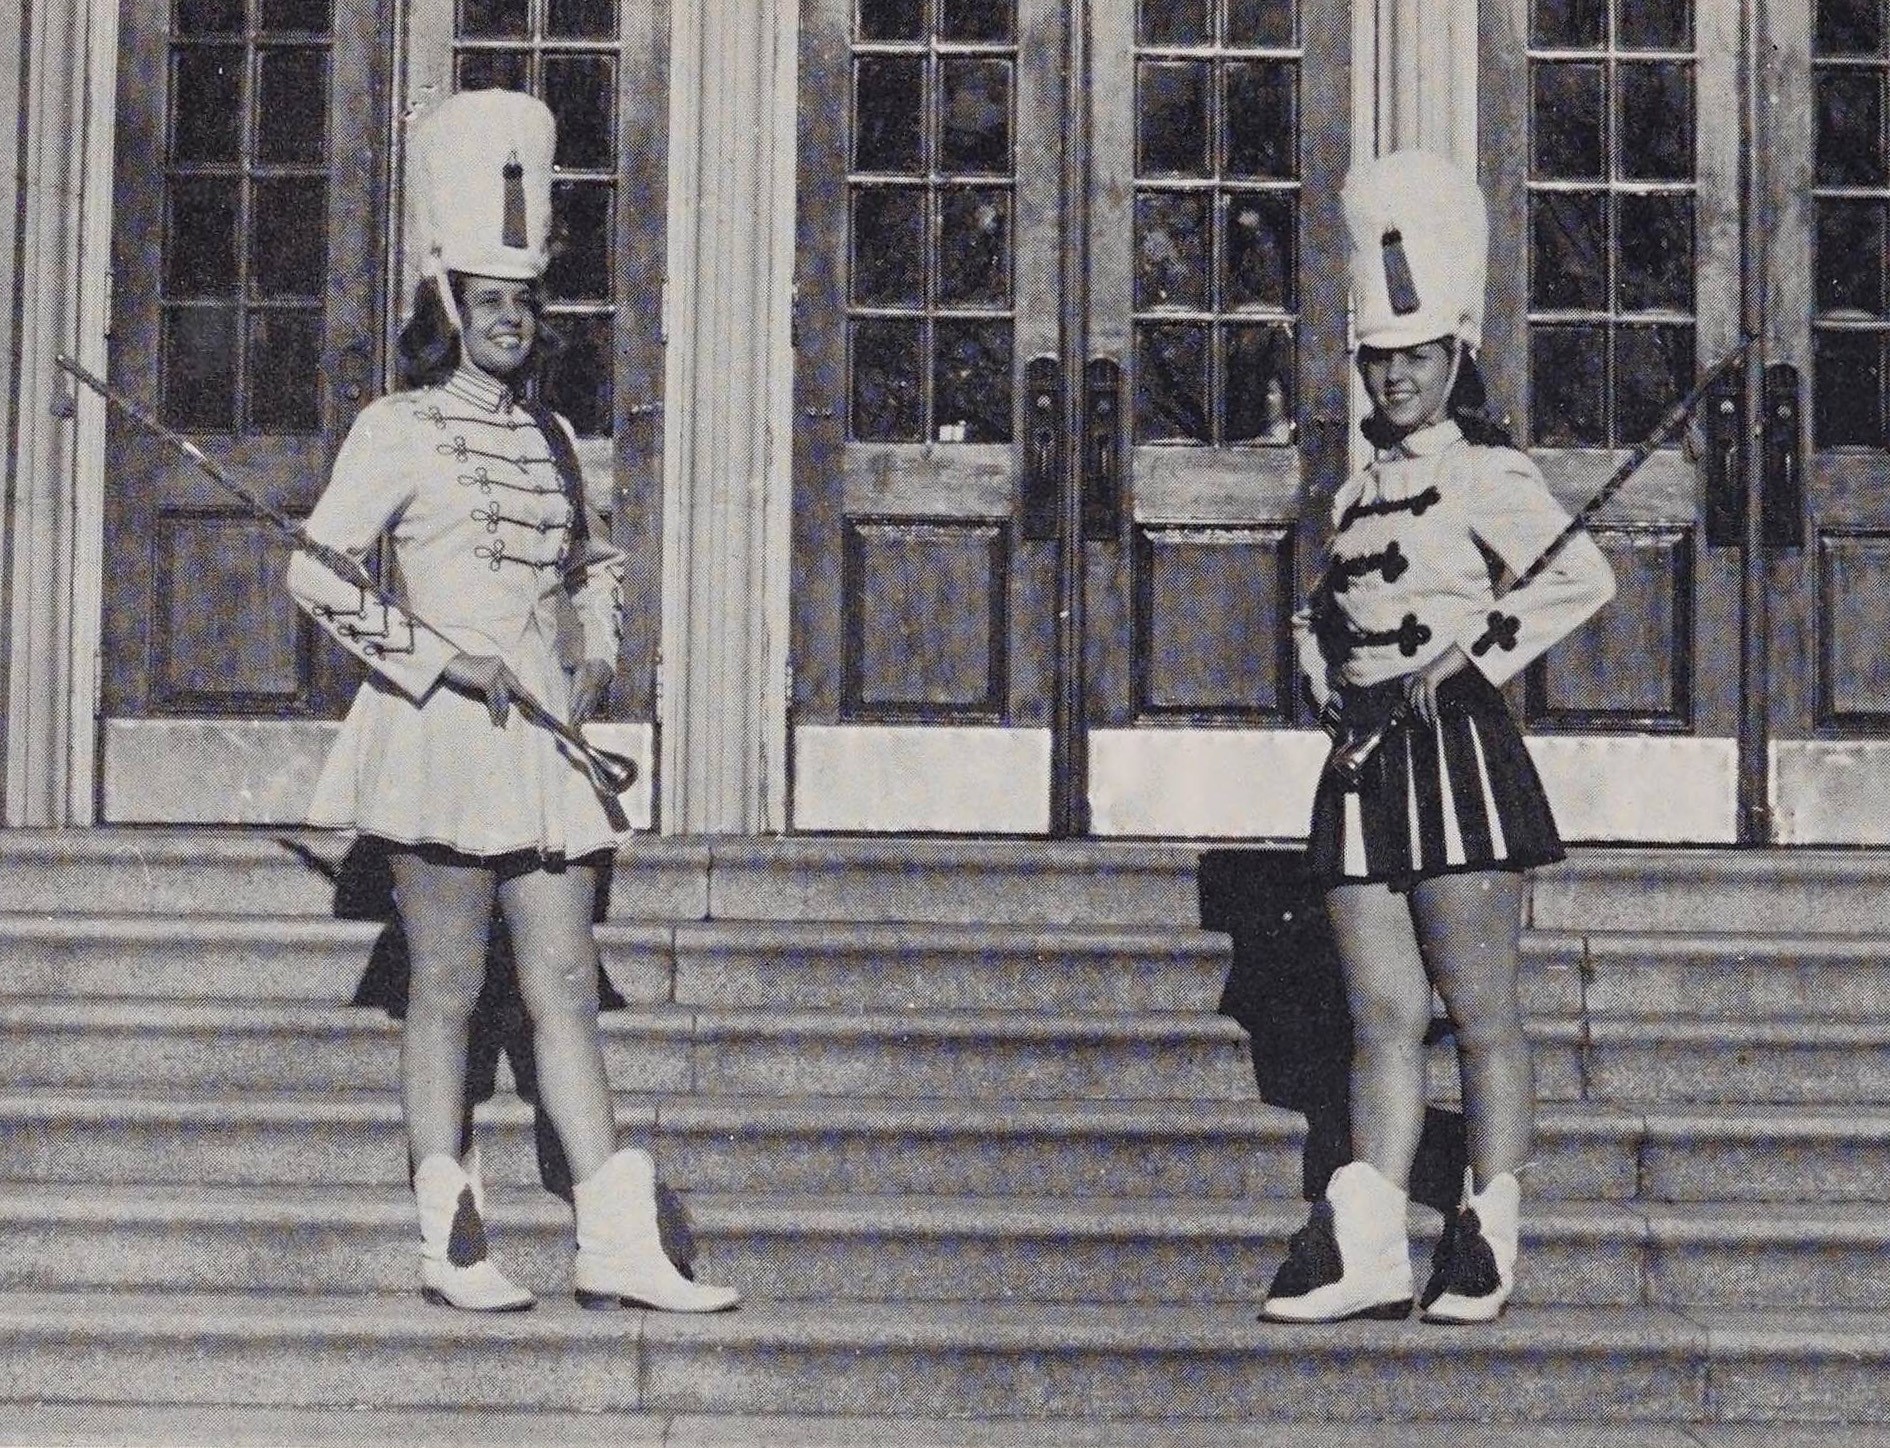 Two individuals standing on steps wearing majorette uniforms with batons in their hands.